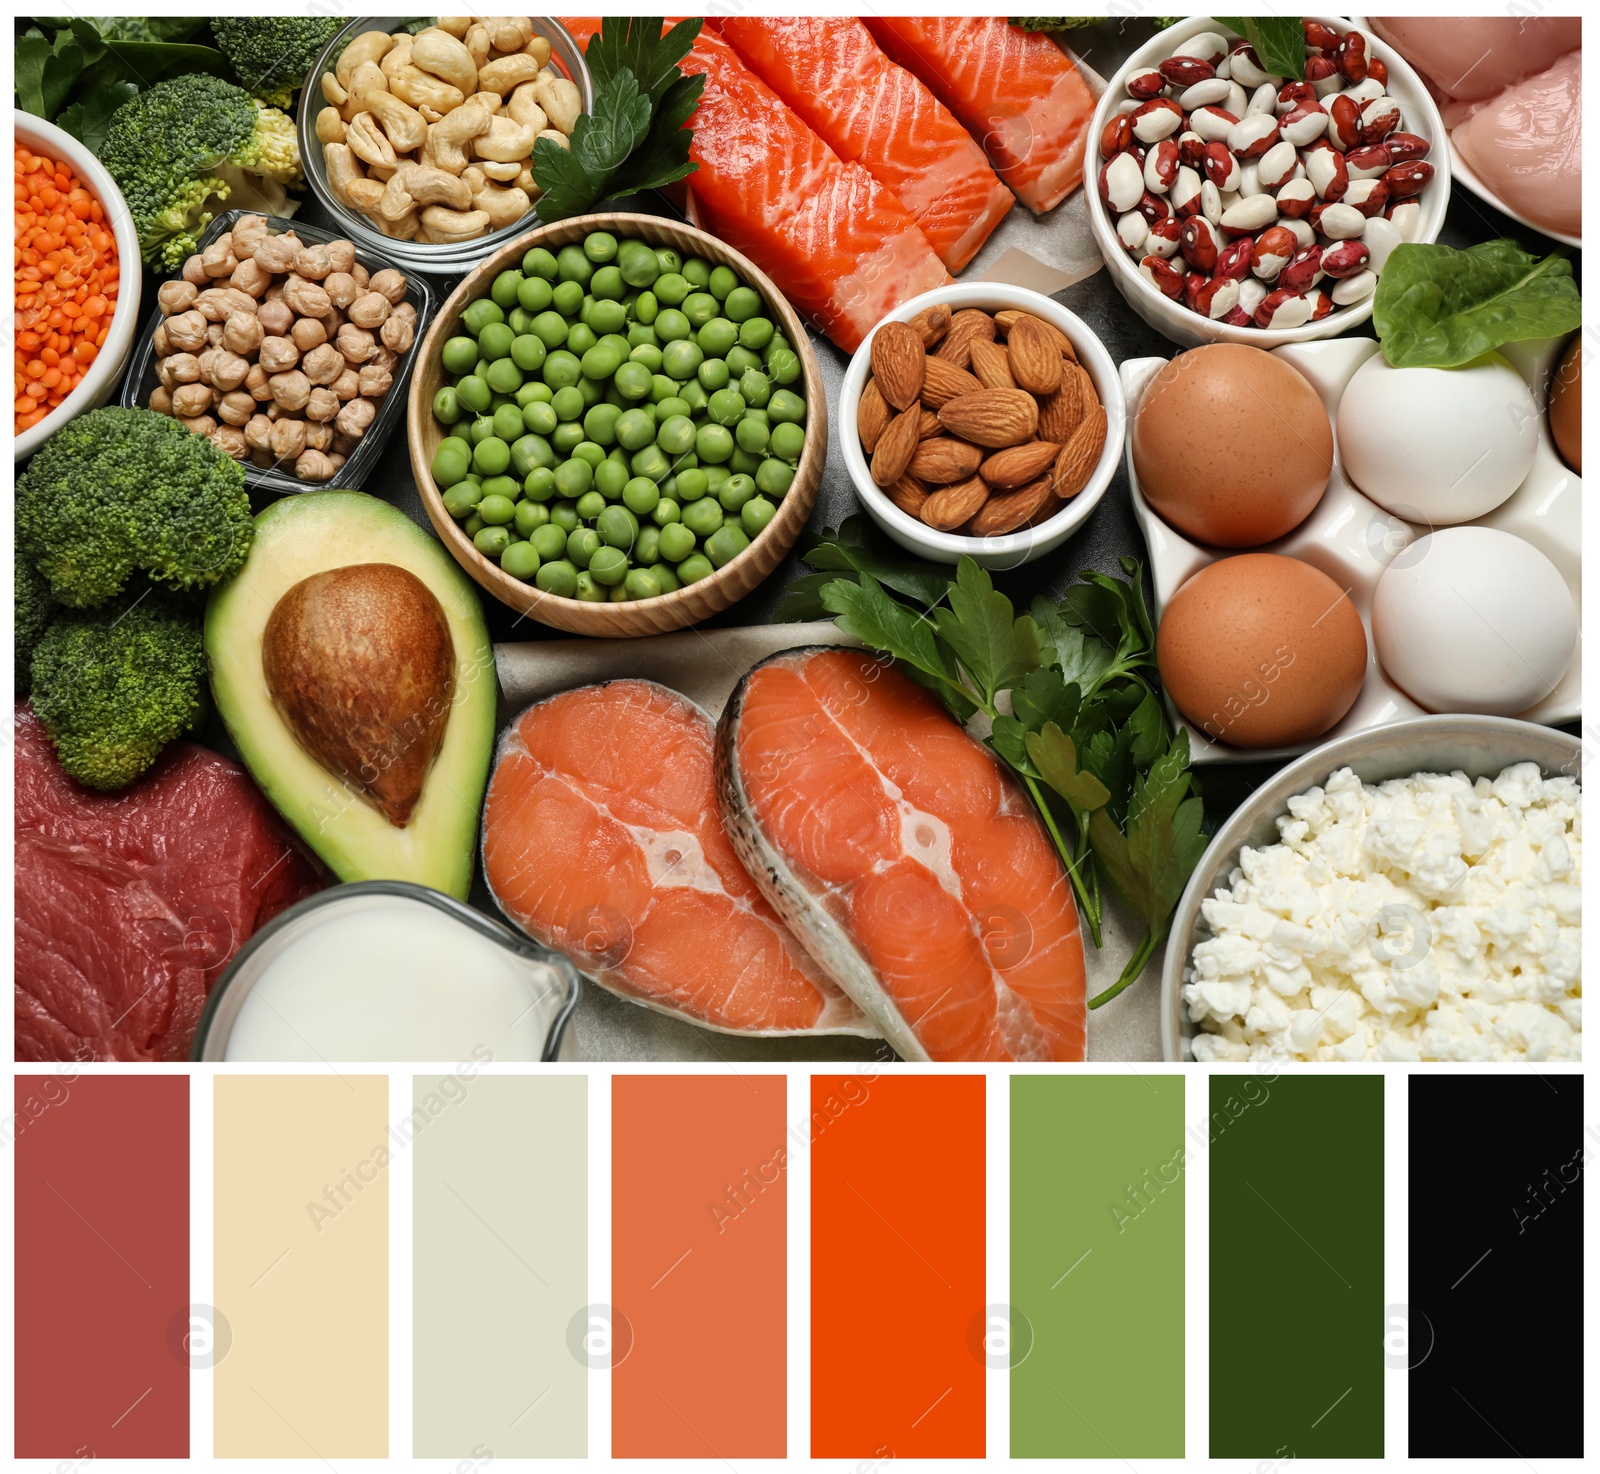 Image of Top view of different products rich in protein and color palette. Collage